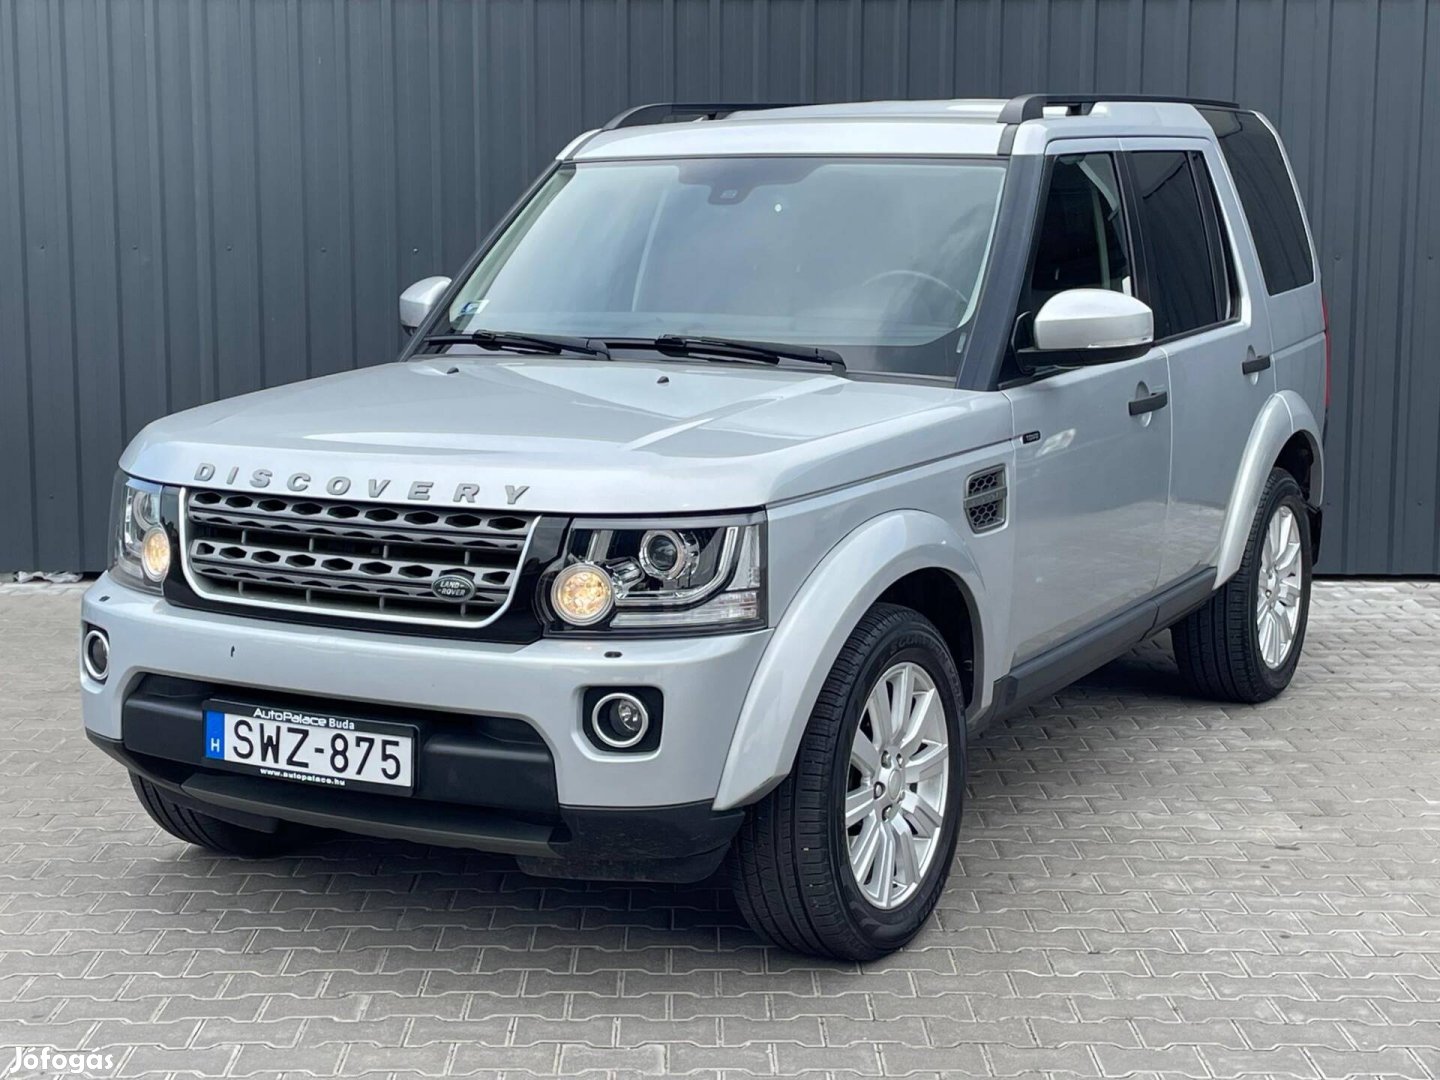 Land Rover Discovery 3.0 TDV6 HSE (Automata) (7...